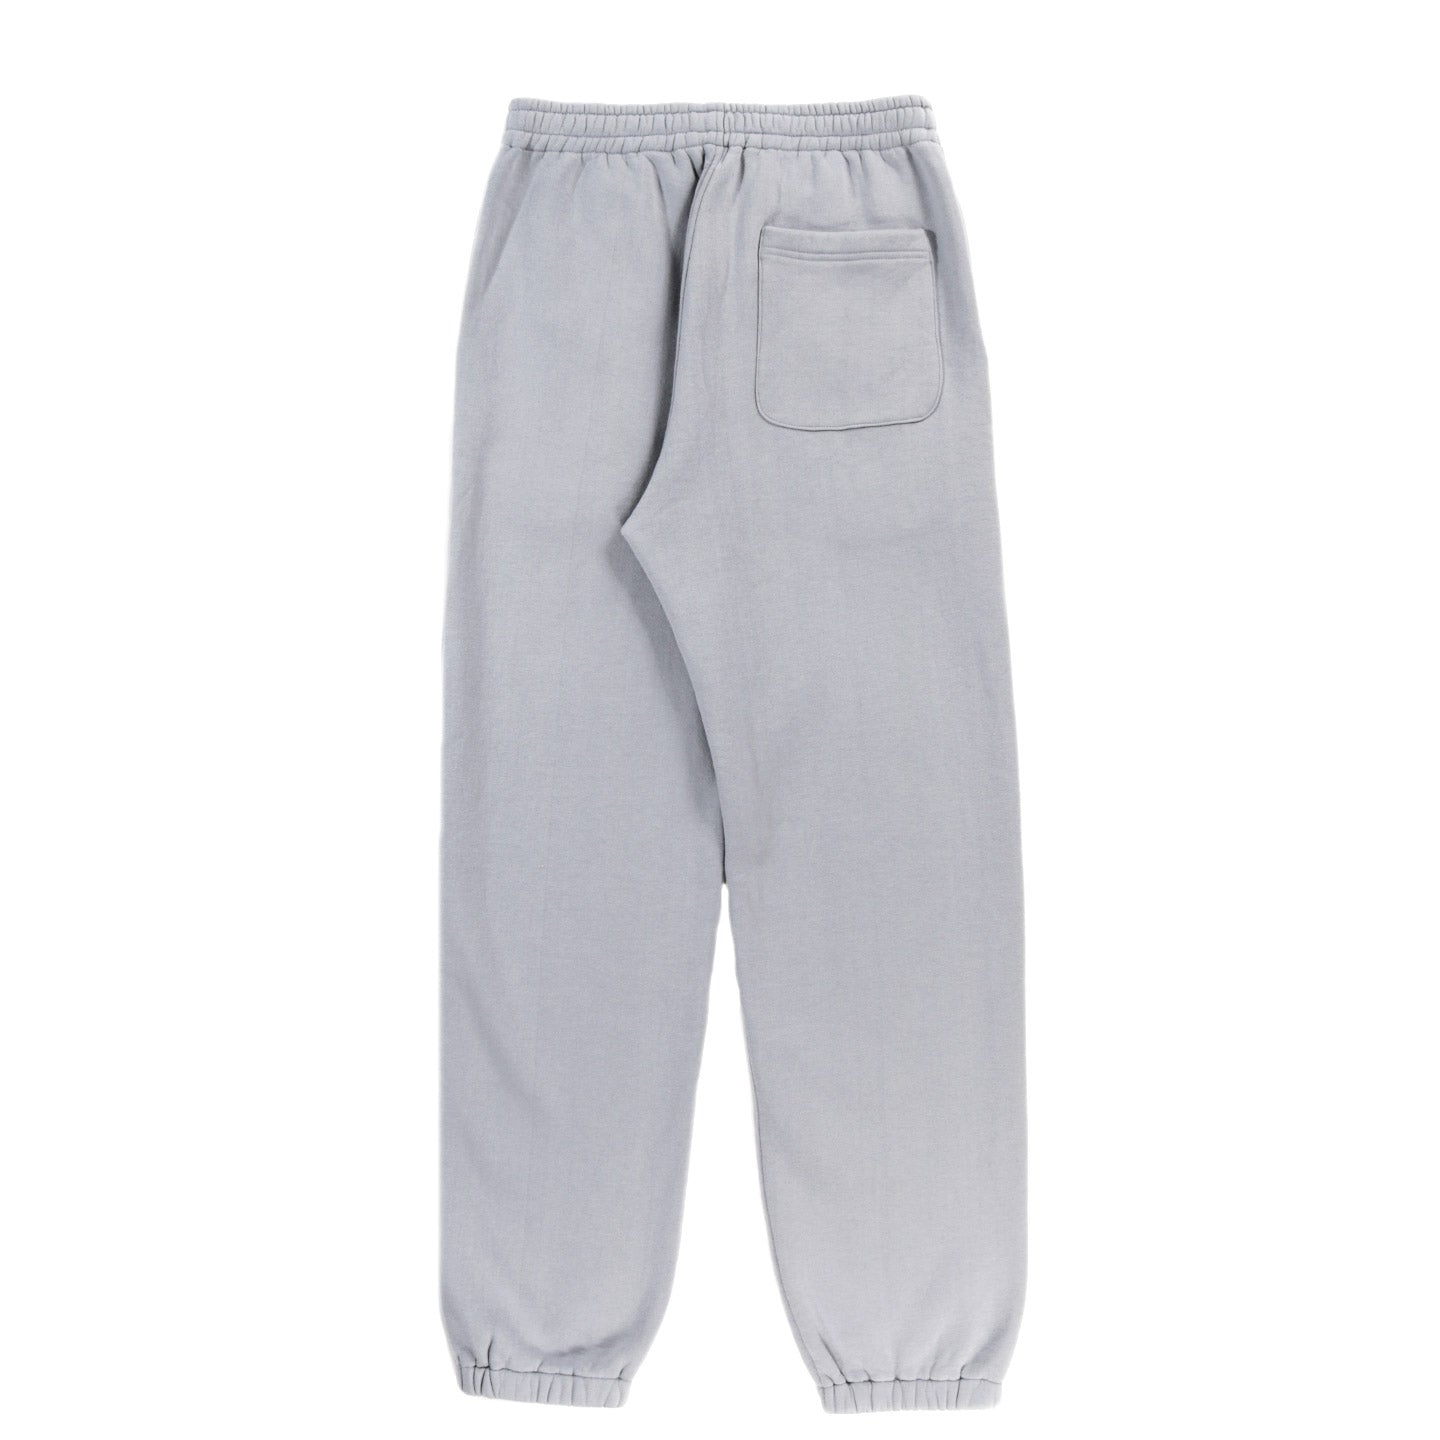 AURALEE SMOOTH SOFT SWEAT PANTS BLUE GRAY